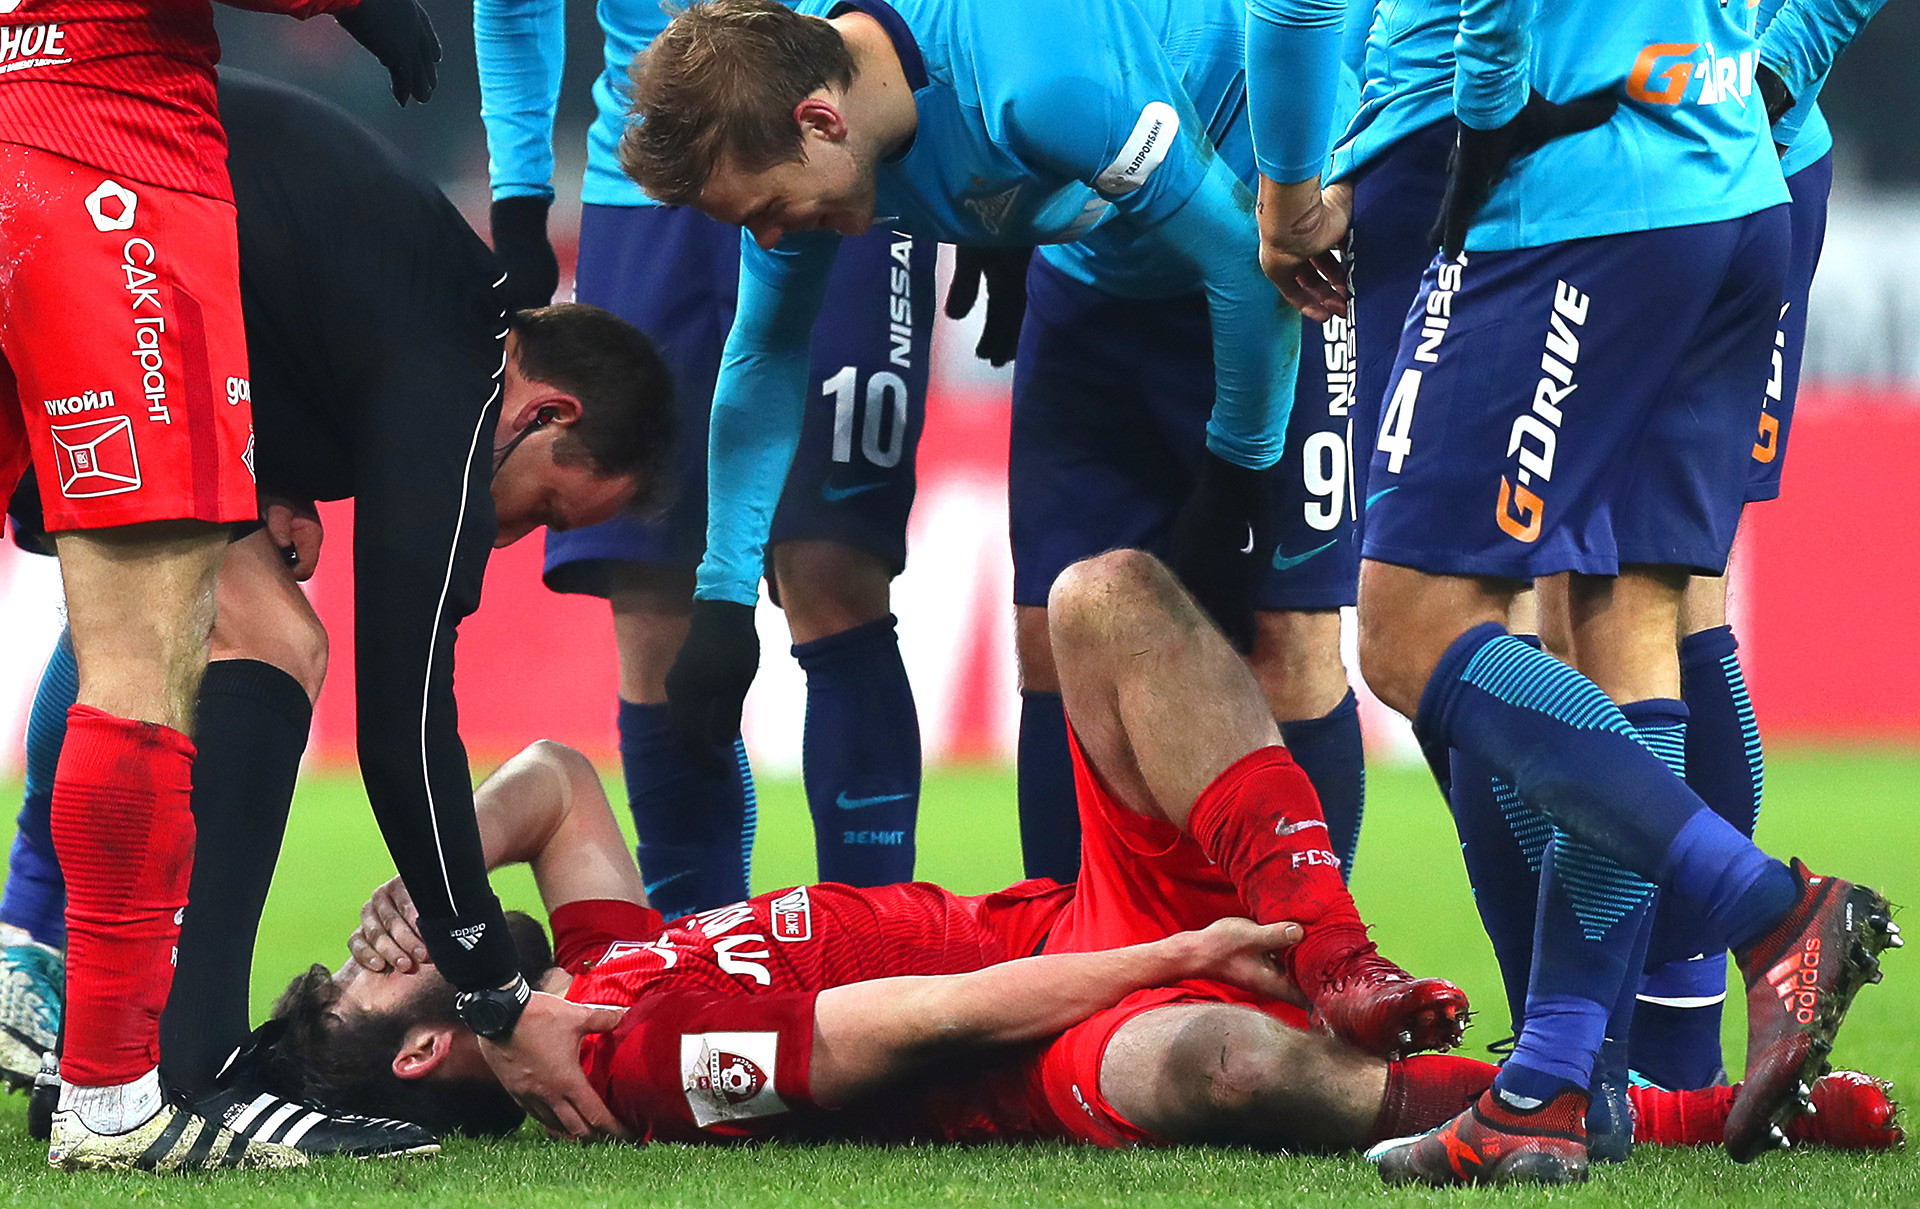 National team hopeful Georgi Dzhikiya is likely to miss out on World Cup action following a cruciate ligament injury in January